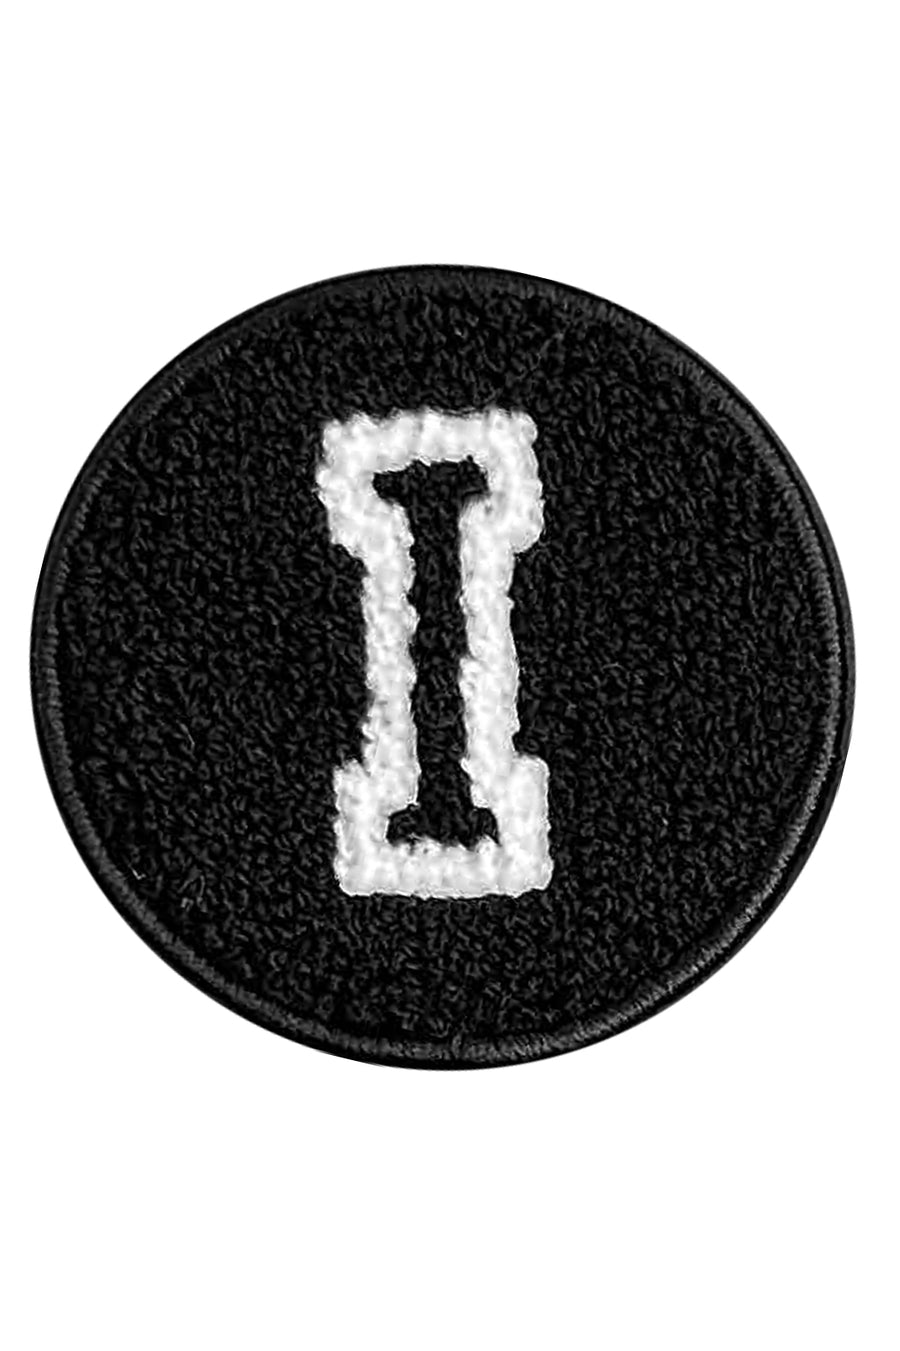 Velcro Initial Letter I Patch